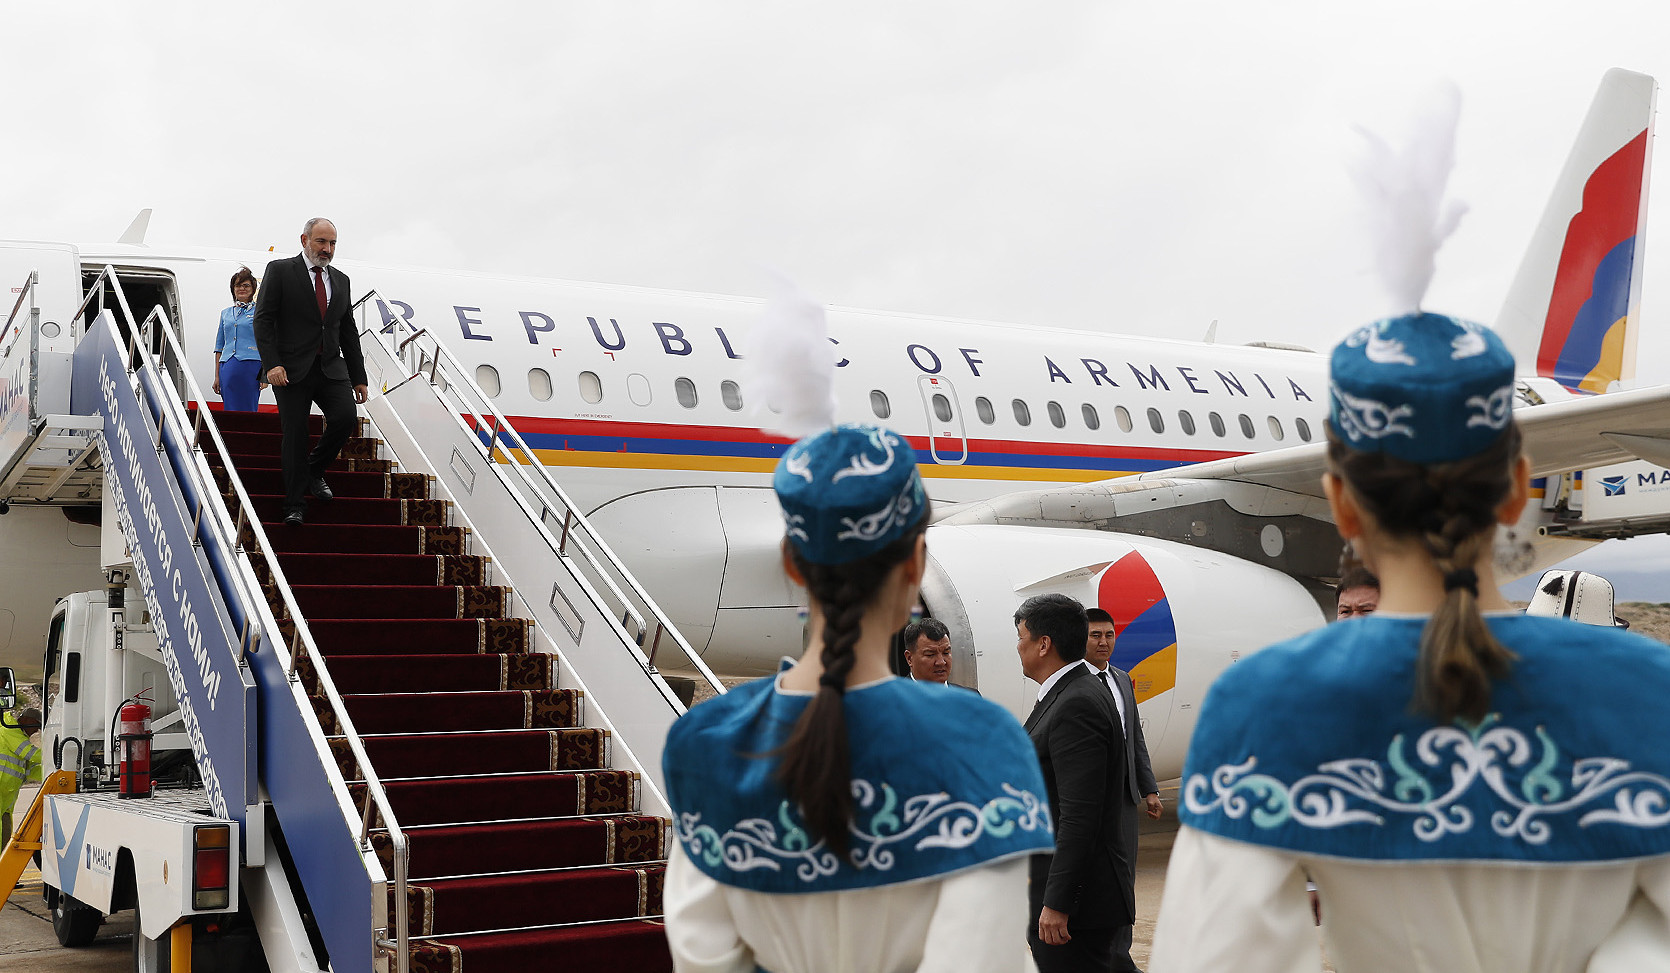 Armenia’s Pashinyan arrives in Kyrgyzstan on a working visit